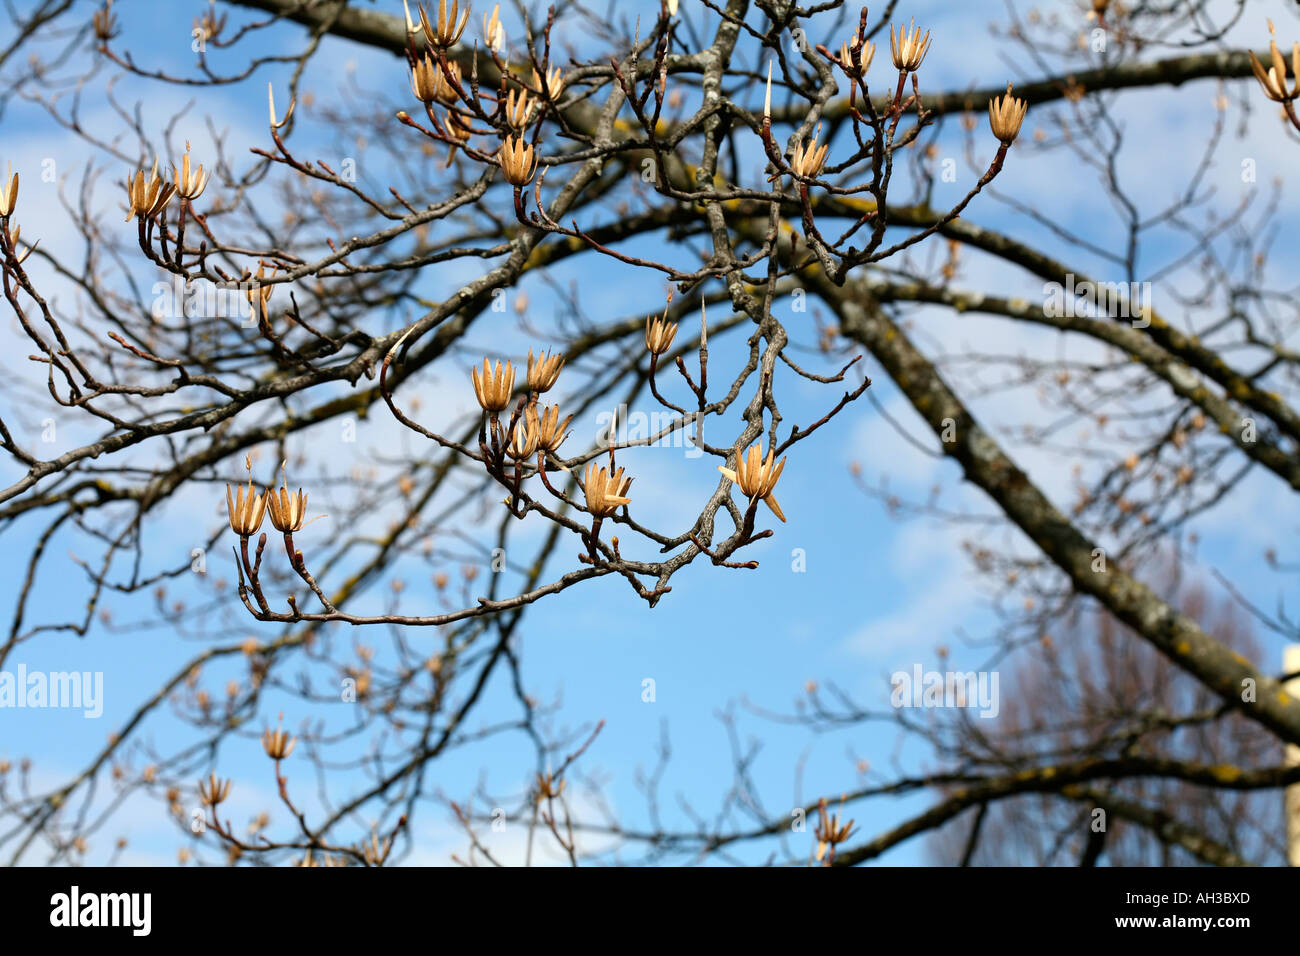 Branches of tulip tree (Liriodendron) or poplar tree with dry flowers during sunny winter day with blue sky Stock Photo